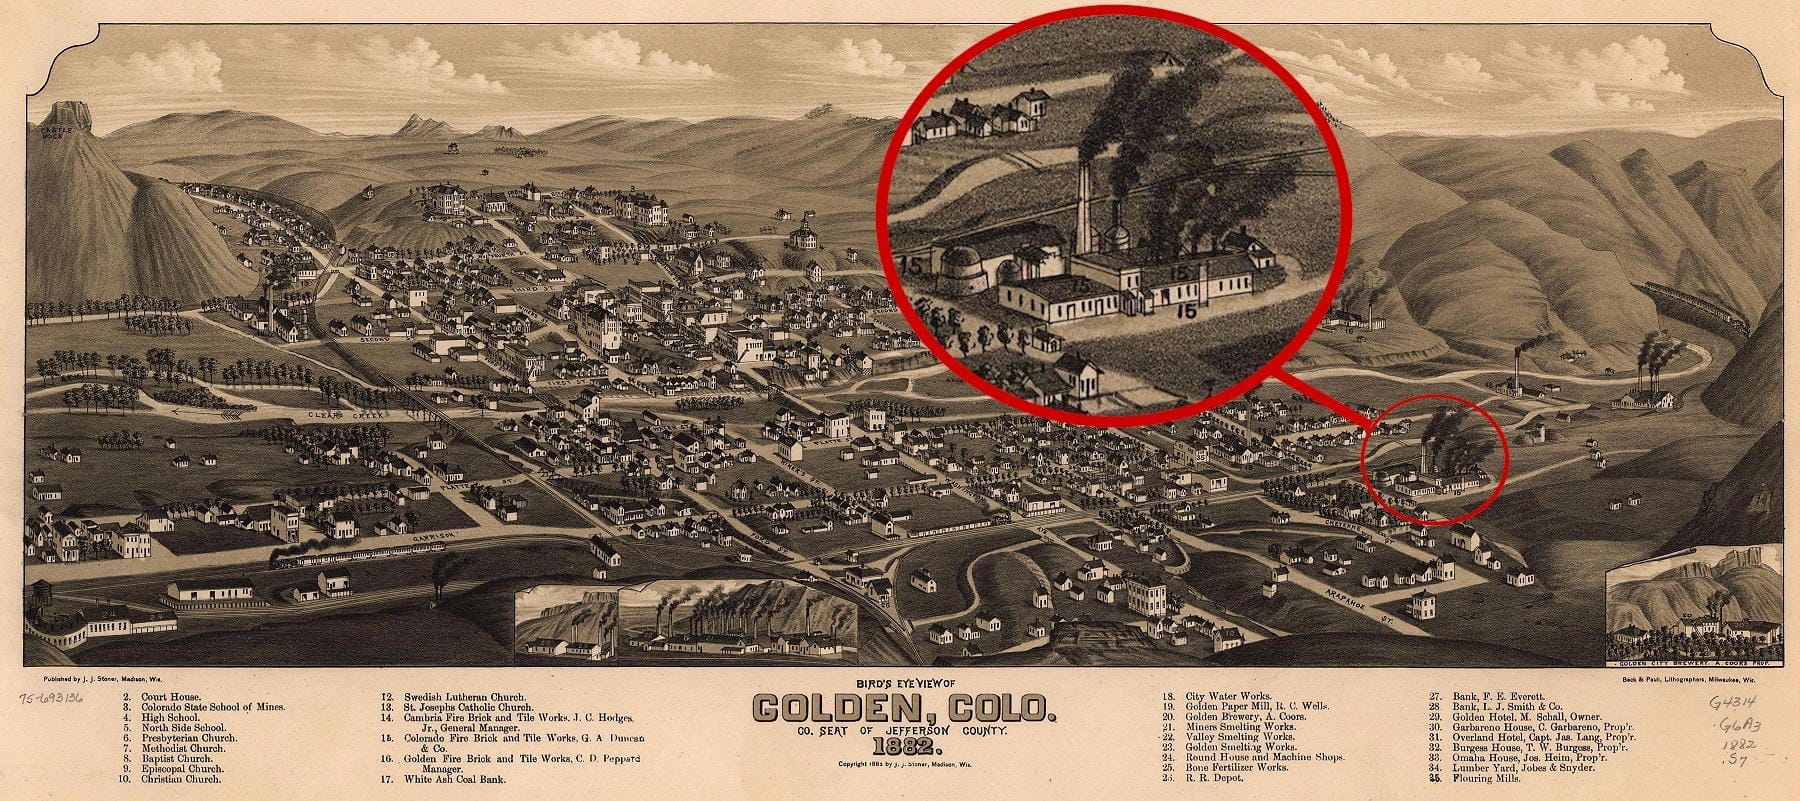 3D drawing of Golden in 1882 with enlarged section showing the brickworks, with several smokestacks producing black smoke